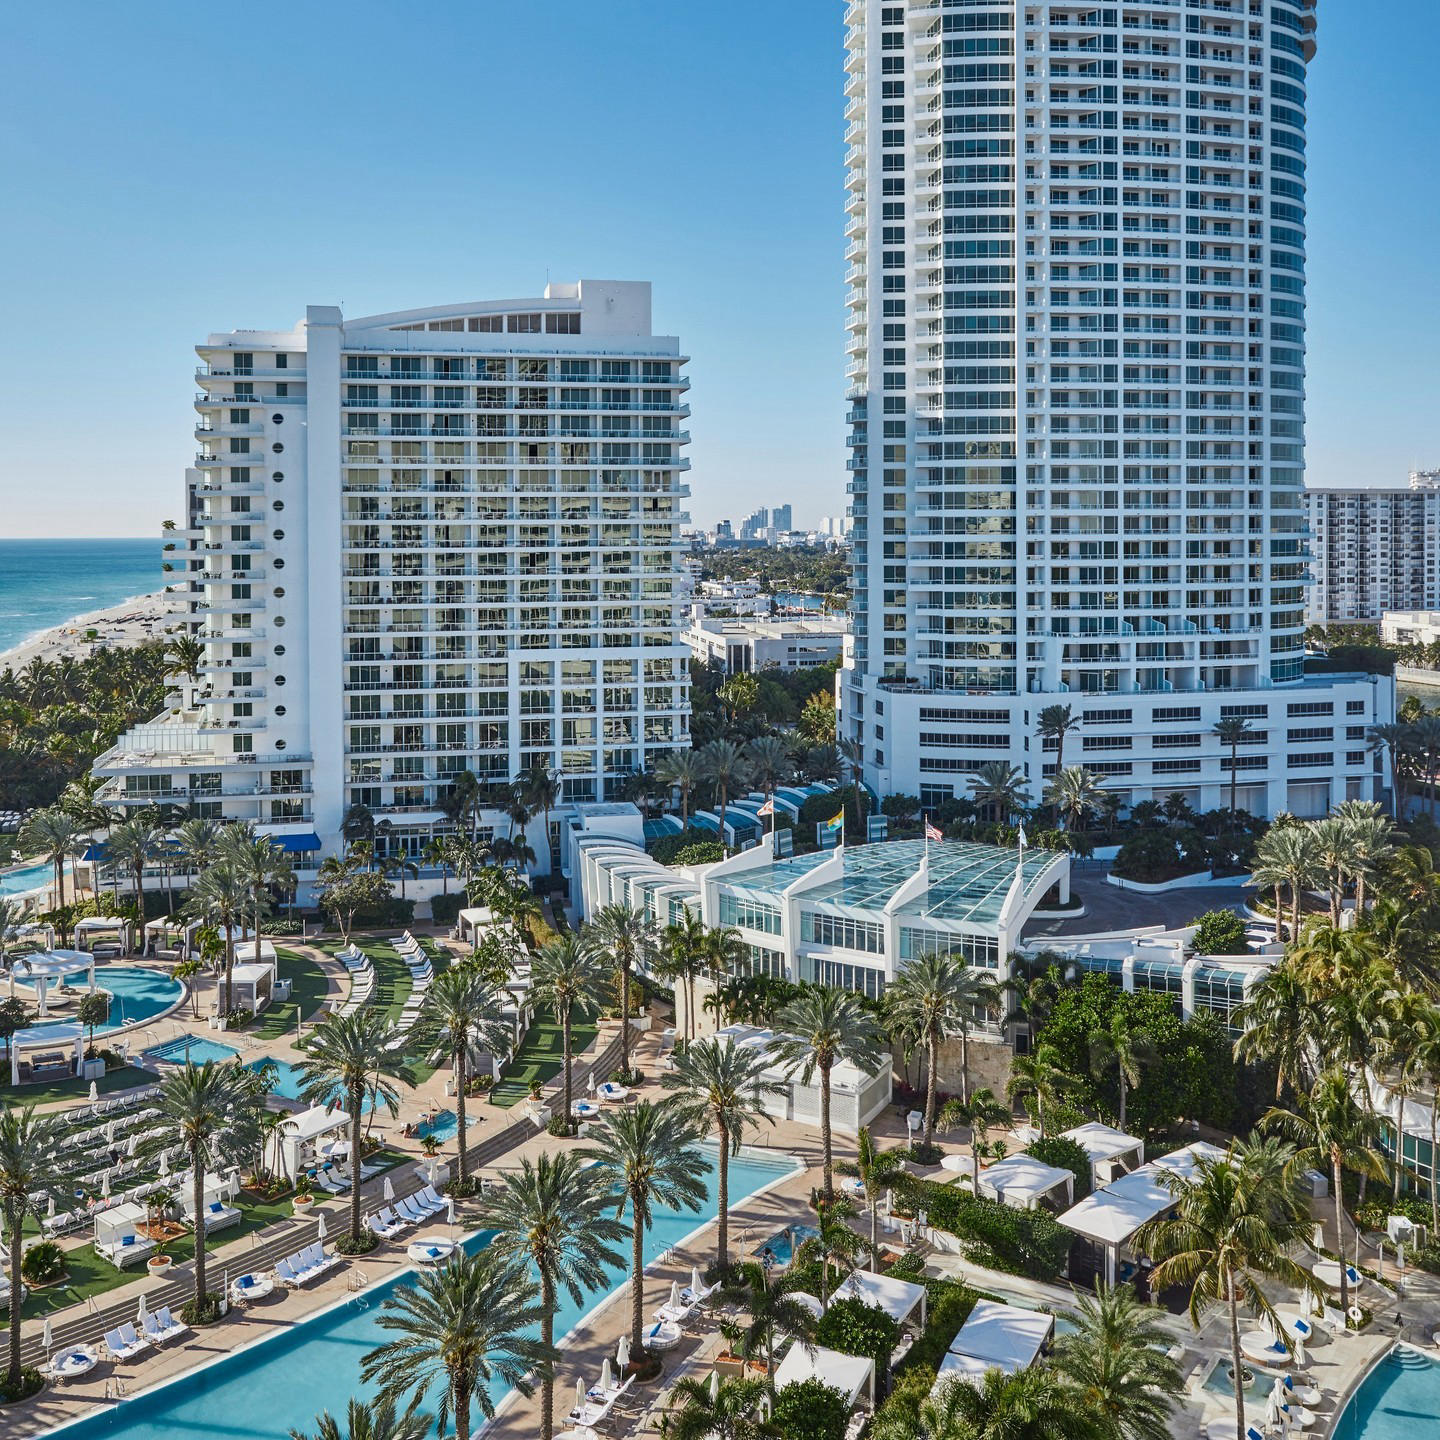 Fontainebleau Miami Beach - A view we'll never get tired of